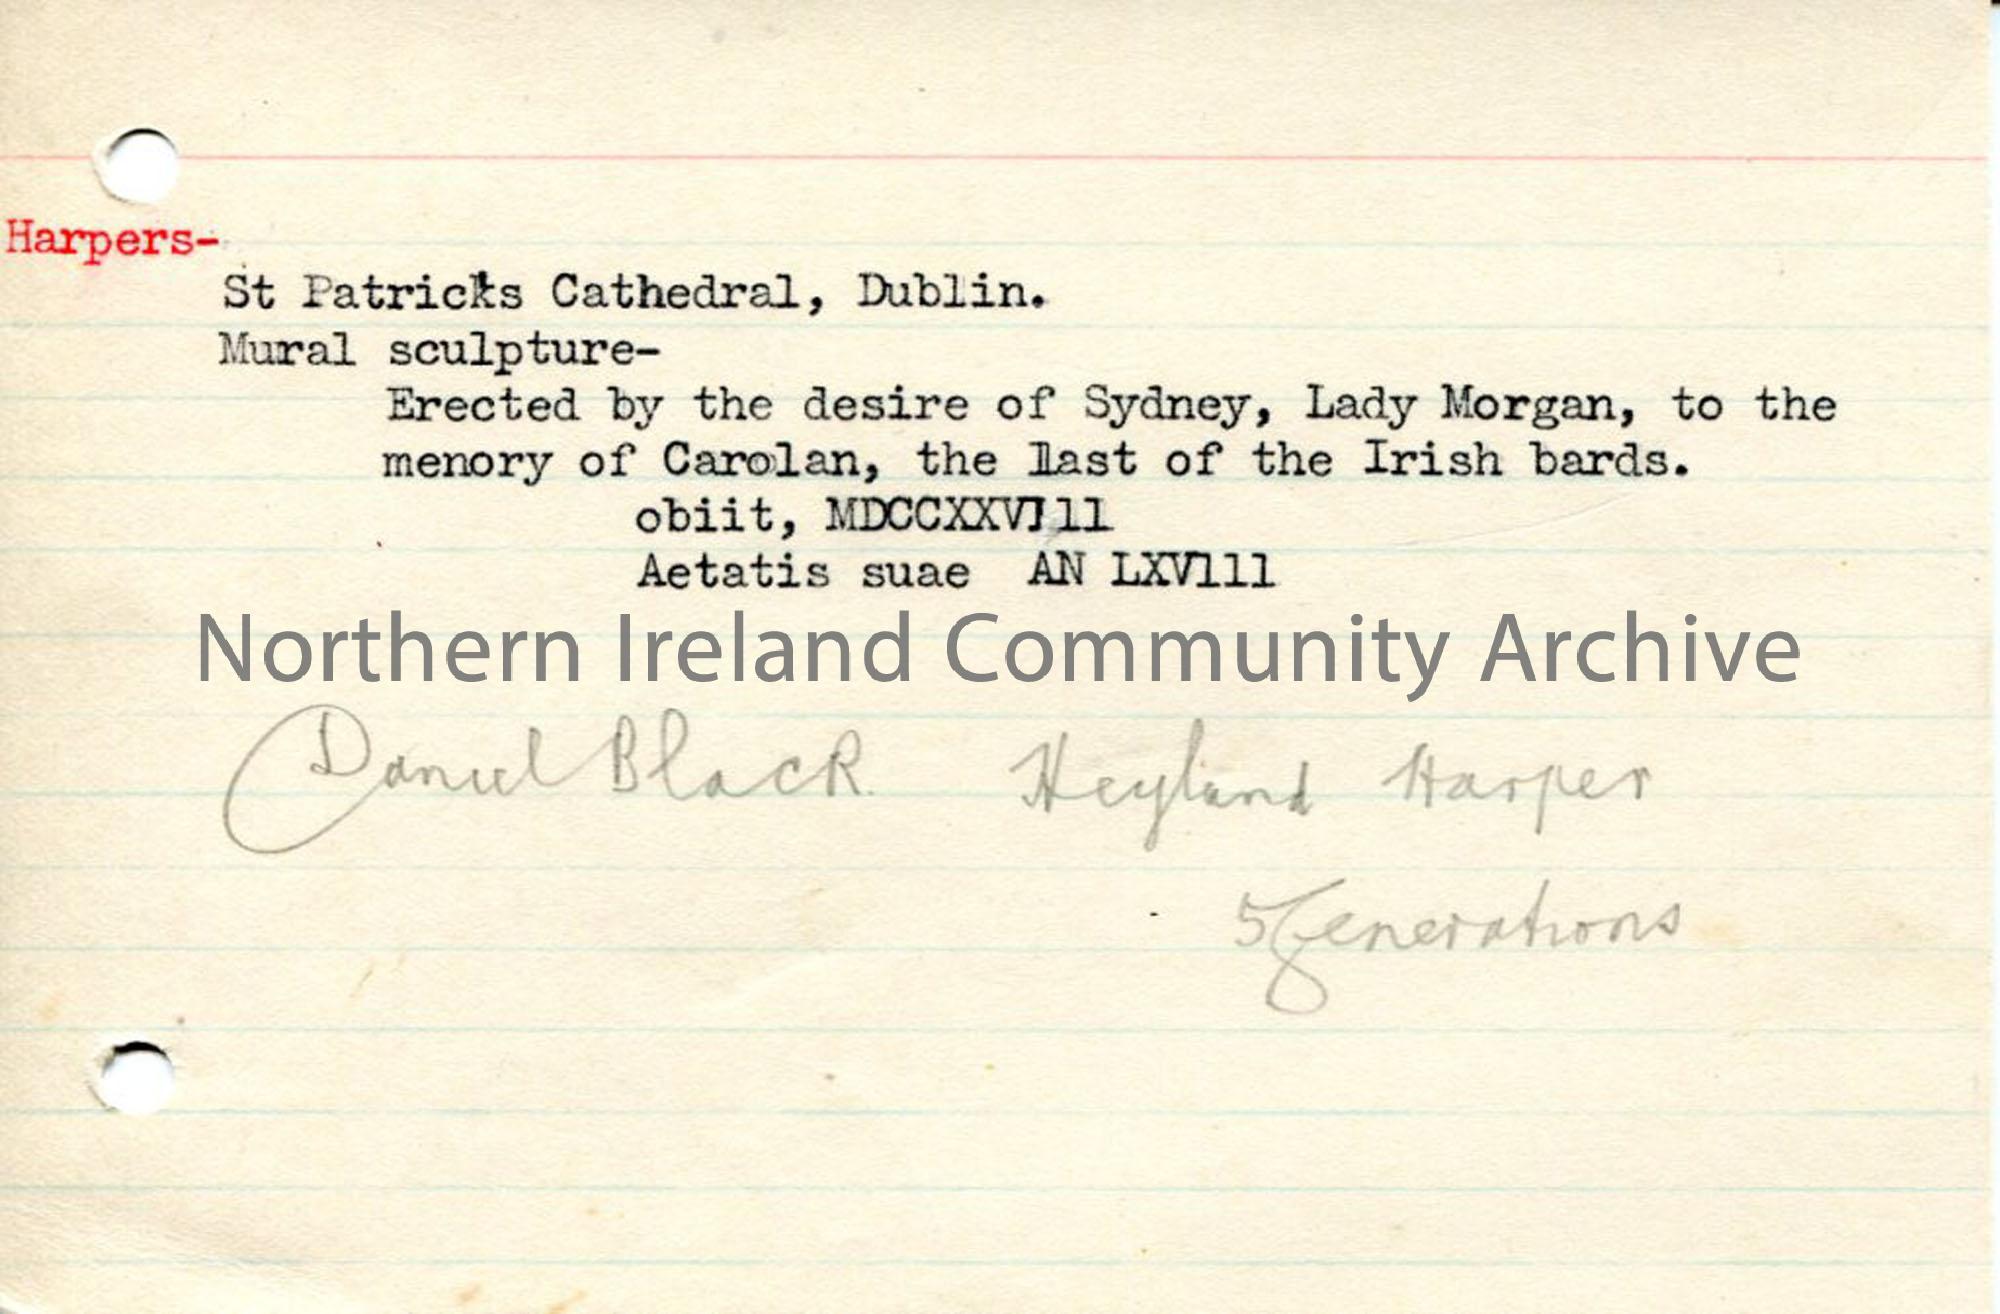 Typed notes re: sculpture in St Patrick’s Cathedral to Carolan, an Irish bard and harper